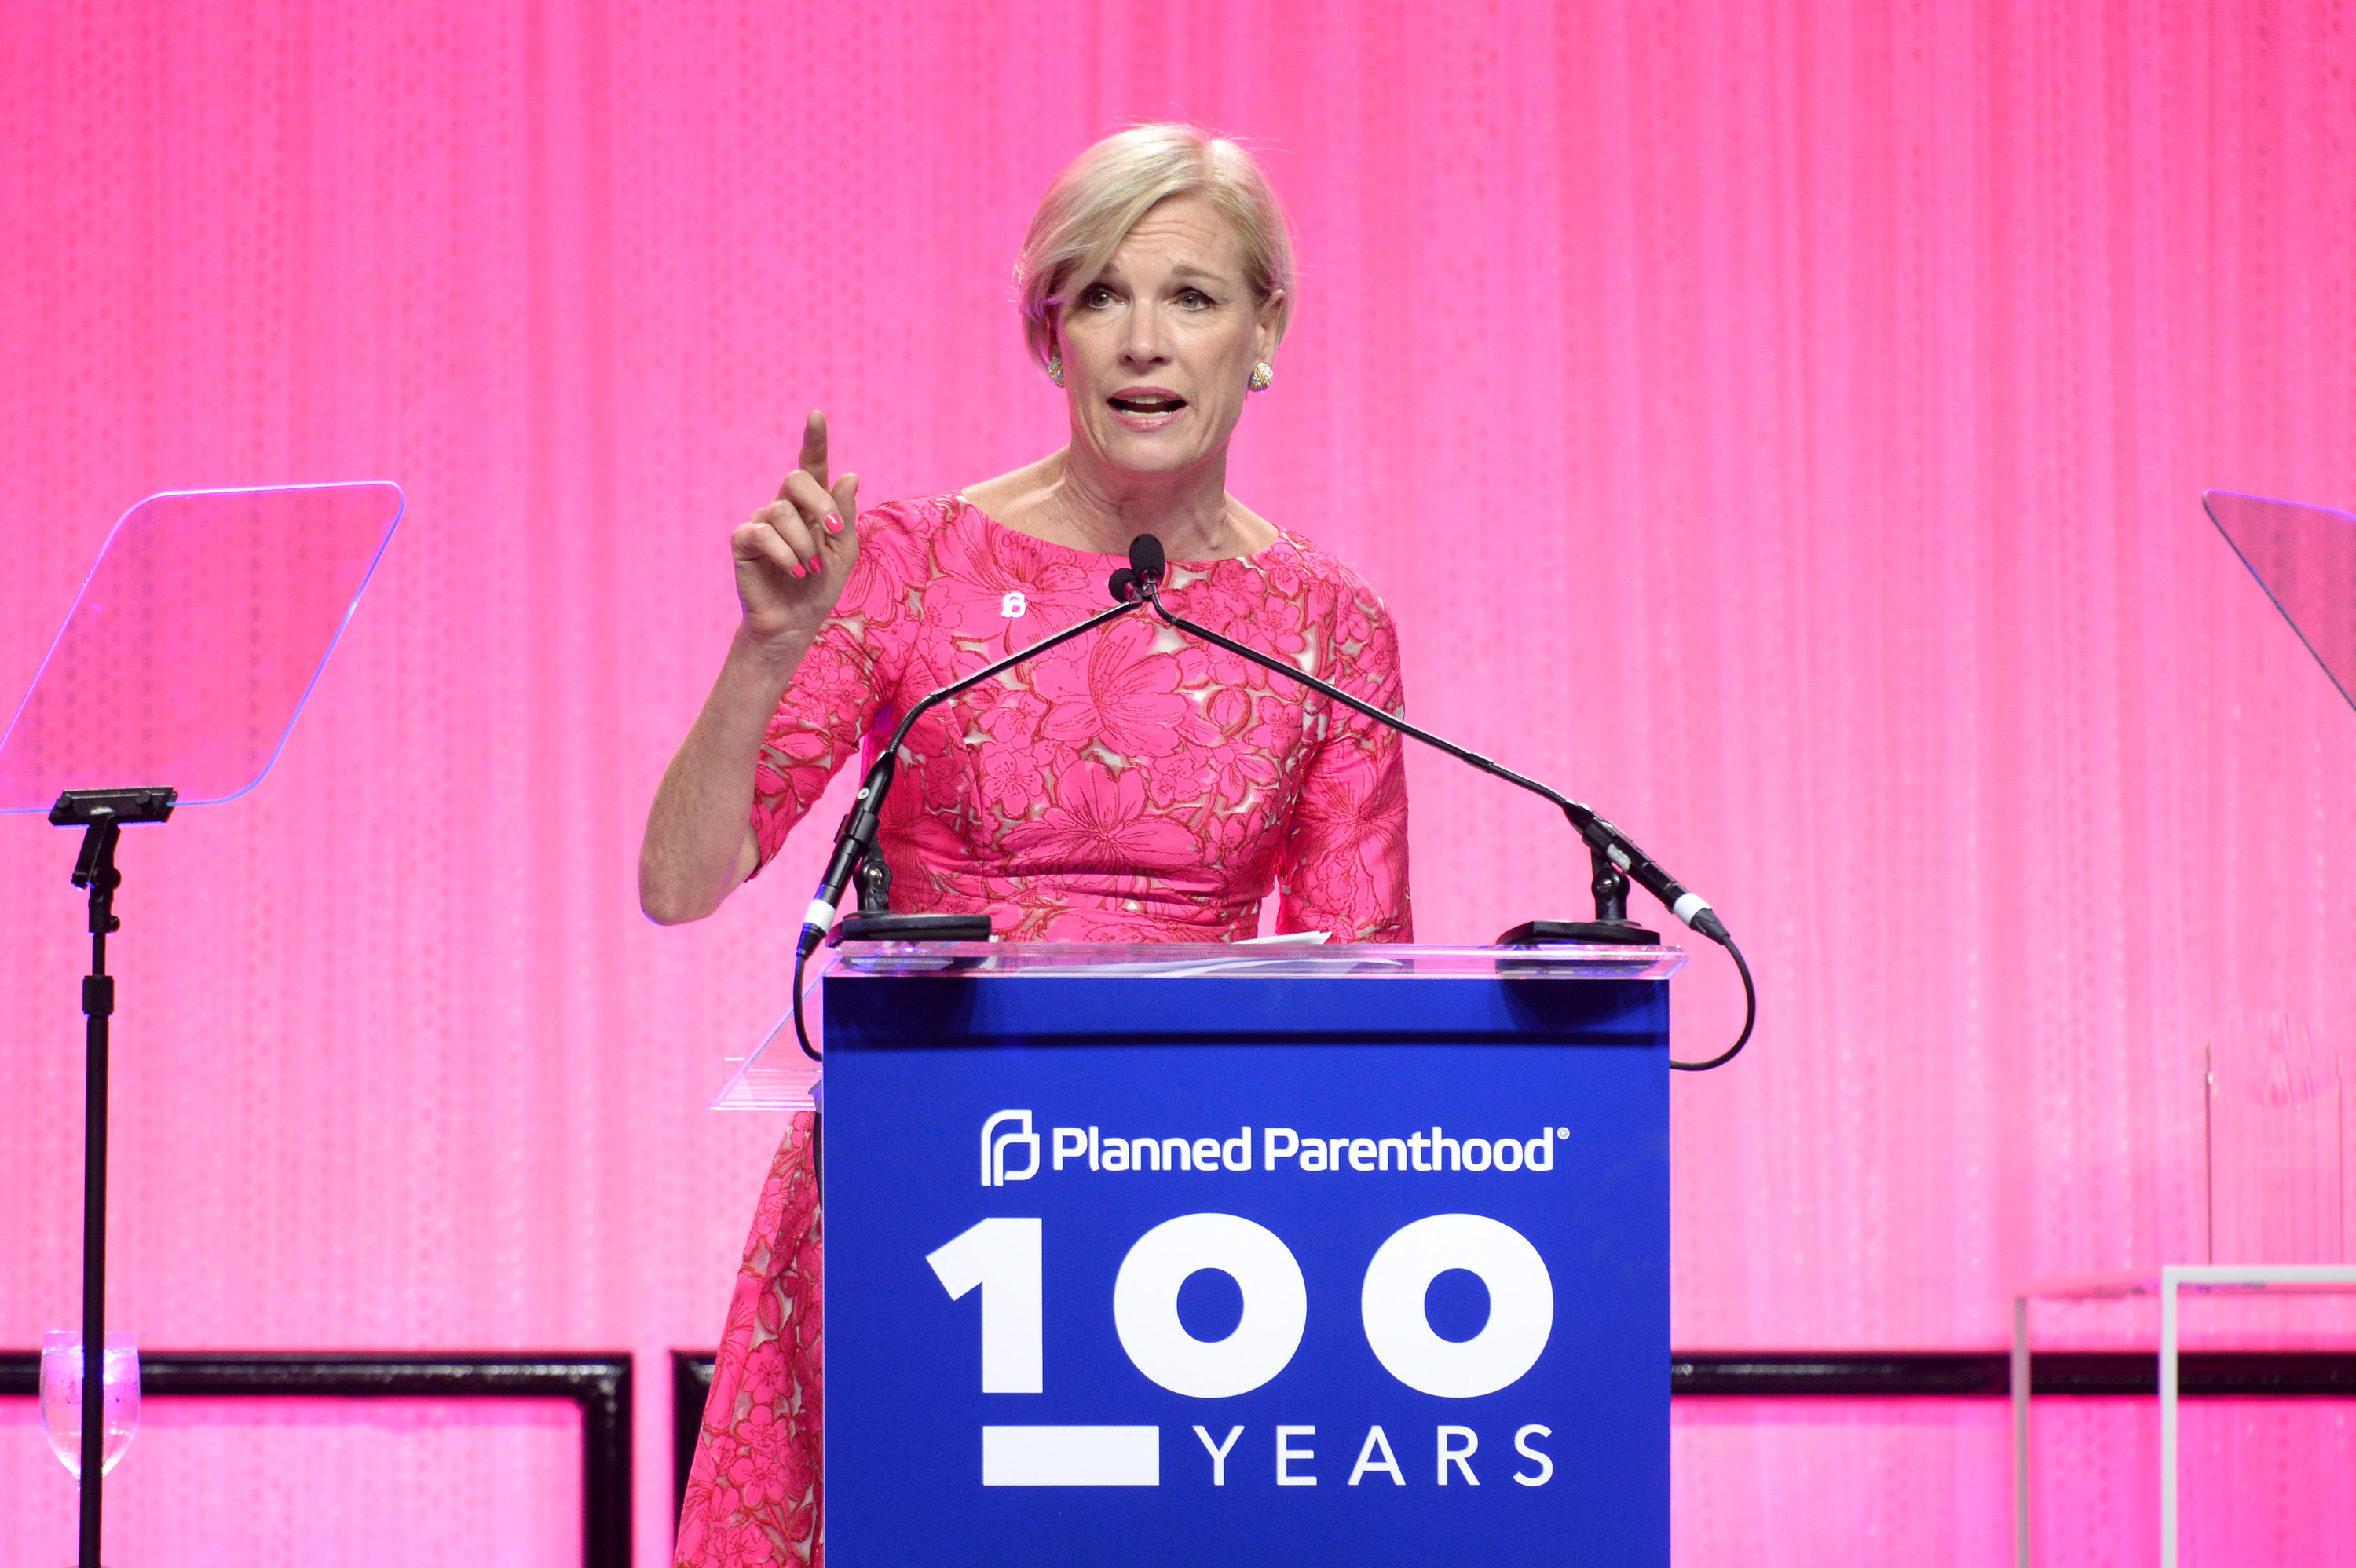 Cecile Richards speaks at the Planned Parenthood 100th Anniversary Gala on May 2, 2017 in New York City (Andrew Toth&mdash;Getty Images)